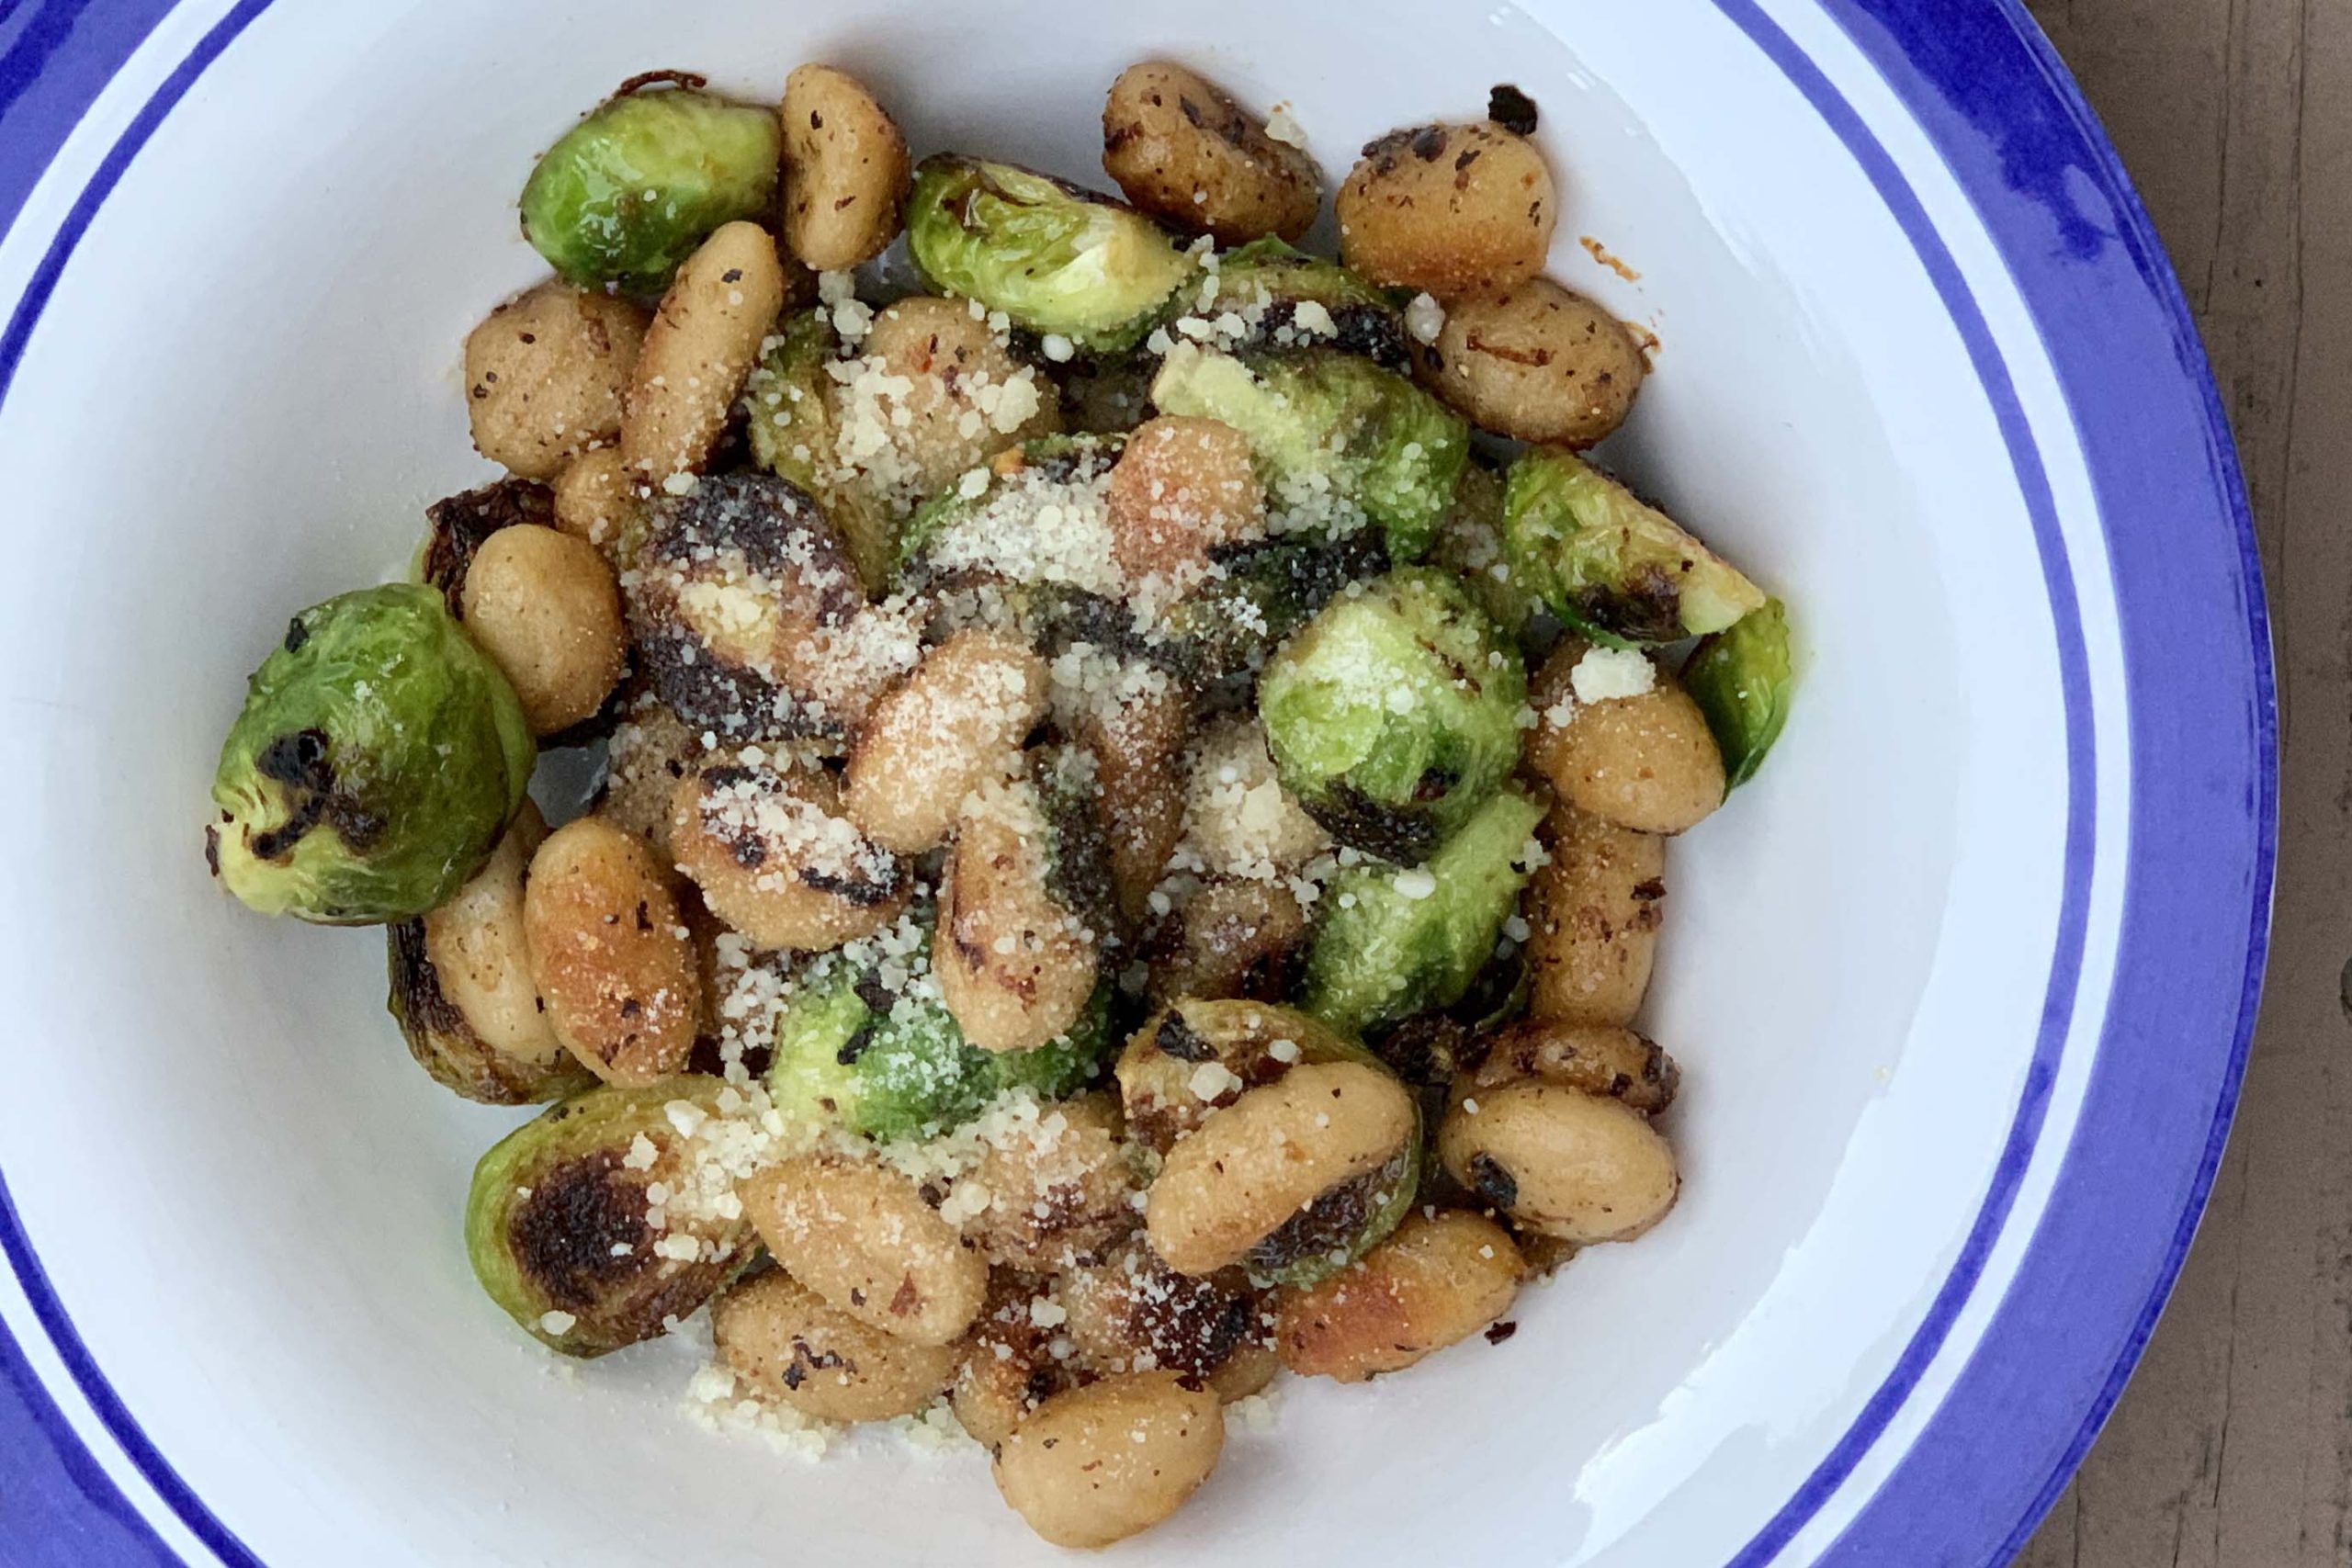 Pan Fried Gnocchi and Brussels Sprouts (Gluten-Free)